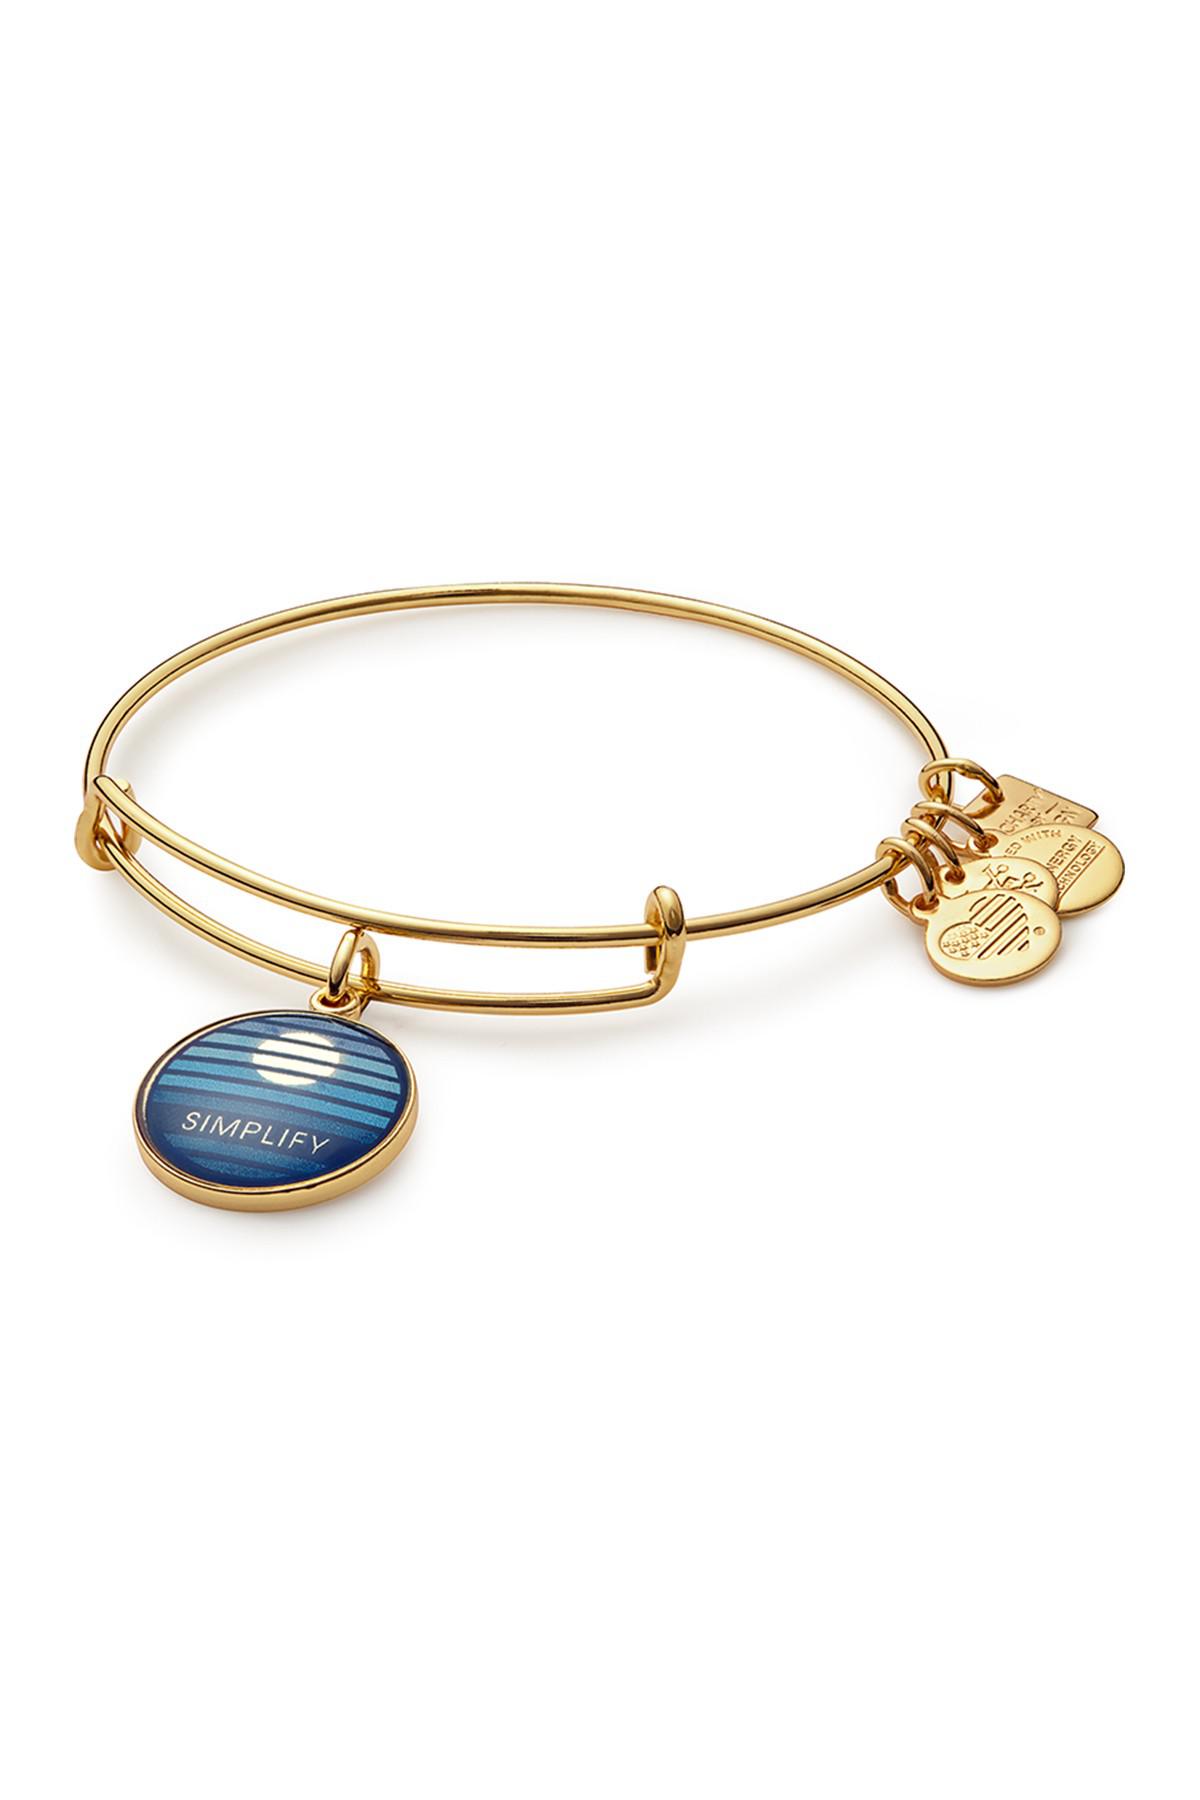 ALEX AND ANI Charity By Design Simplify Charm Expandable ...